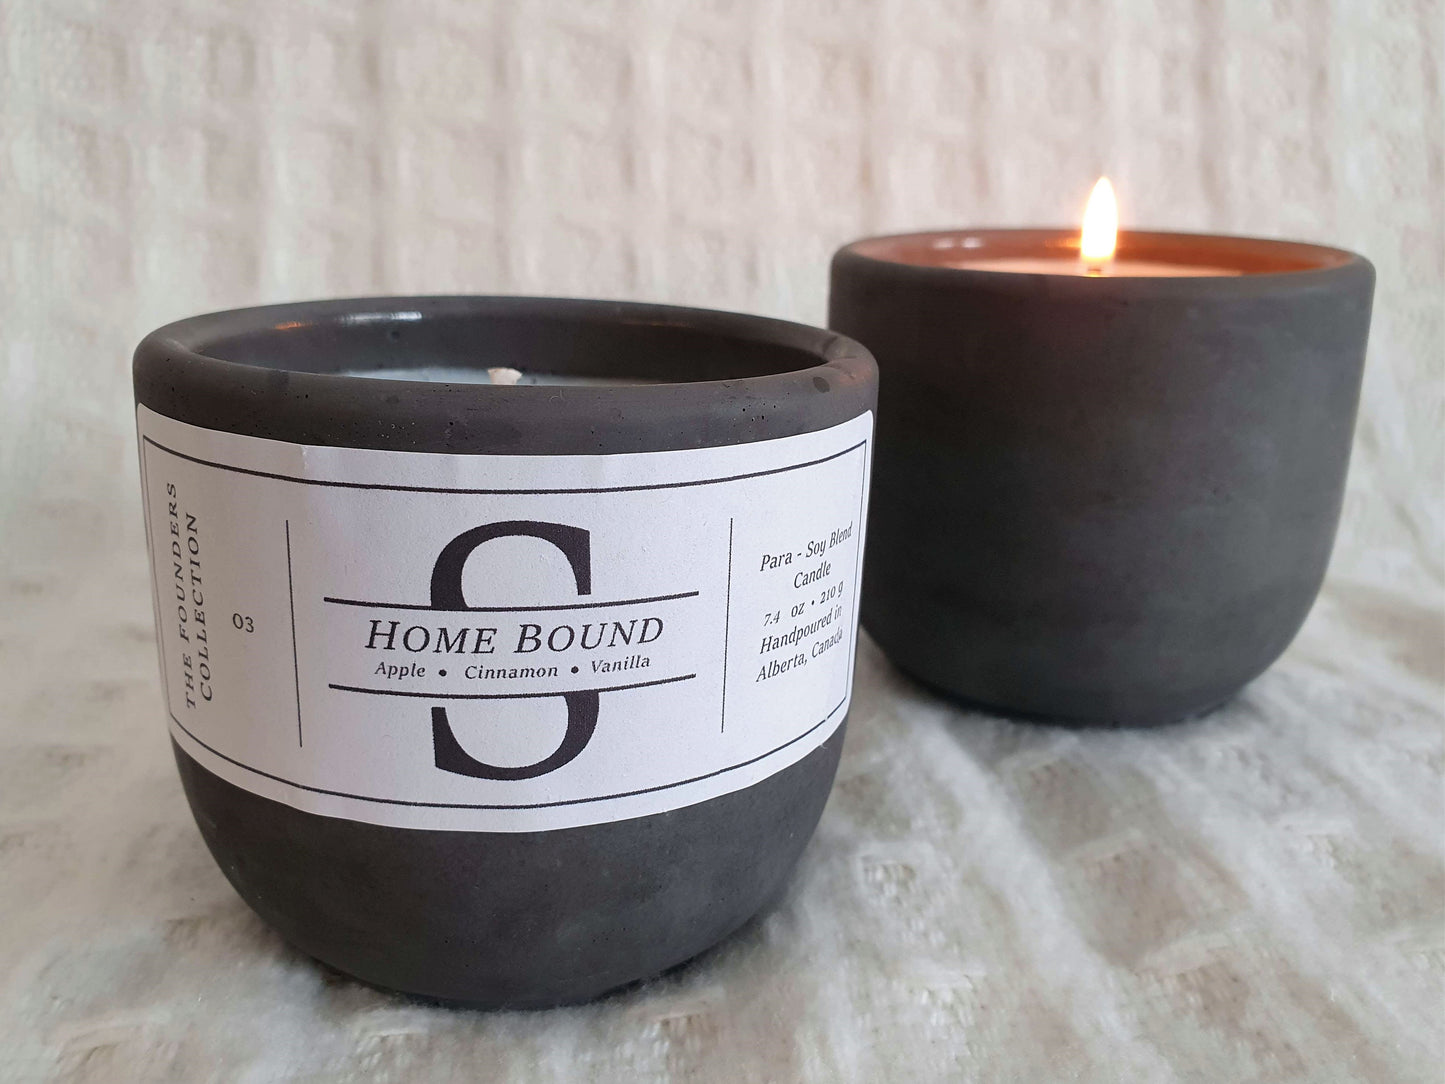 03 Home Bound 3" Concrete Candle